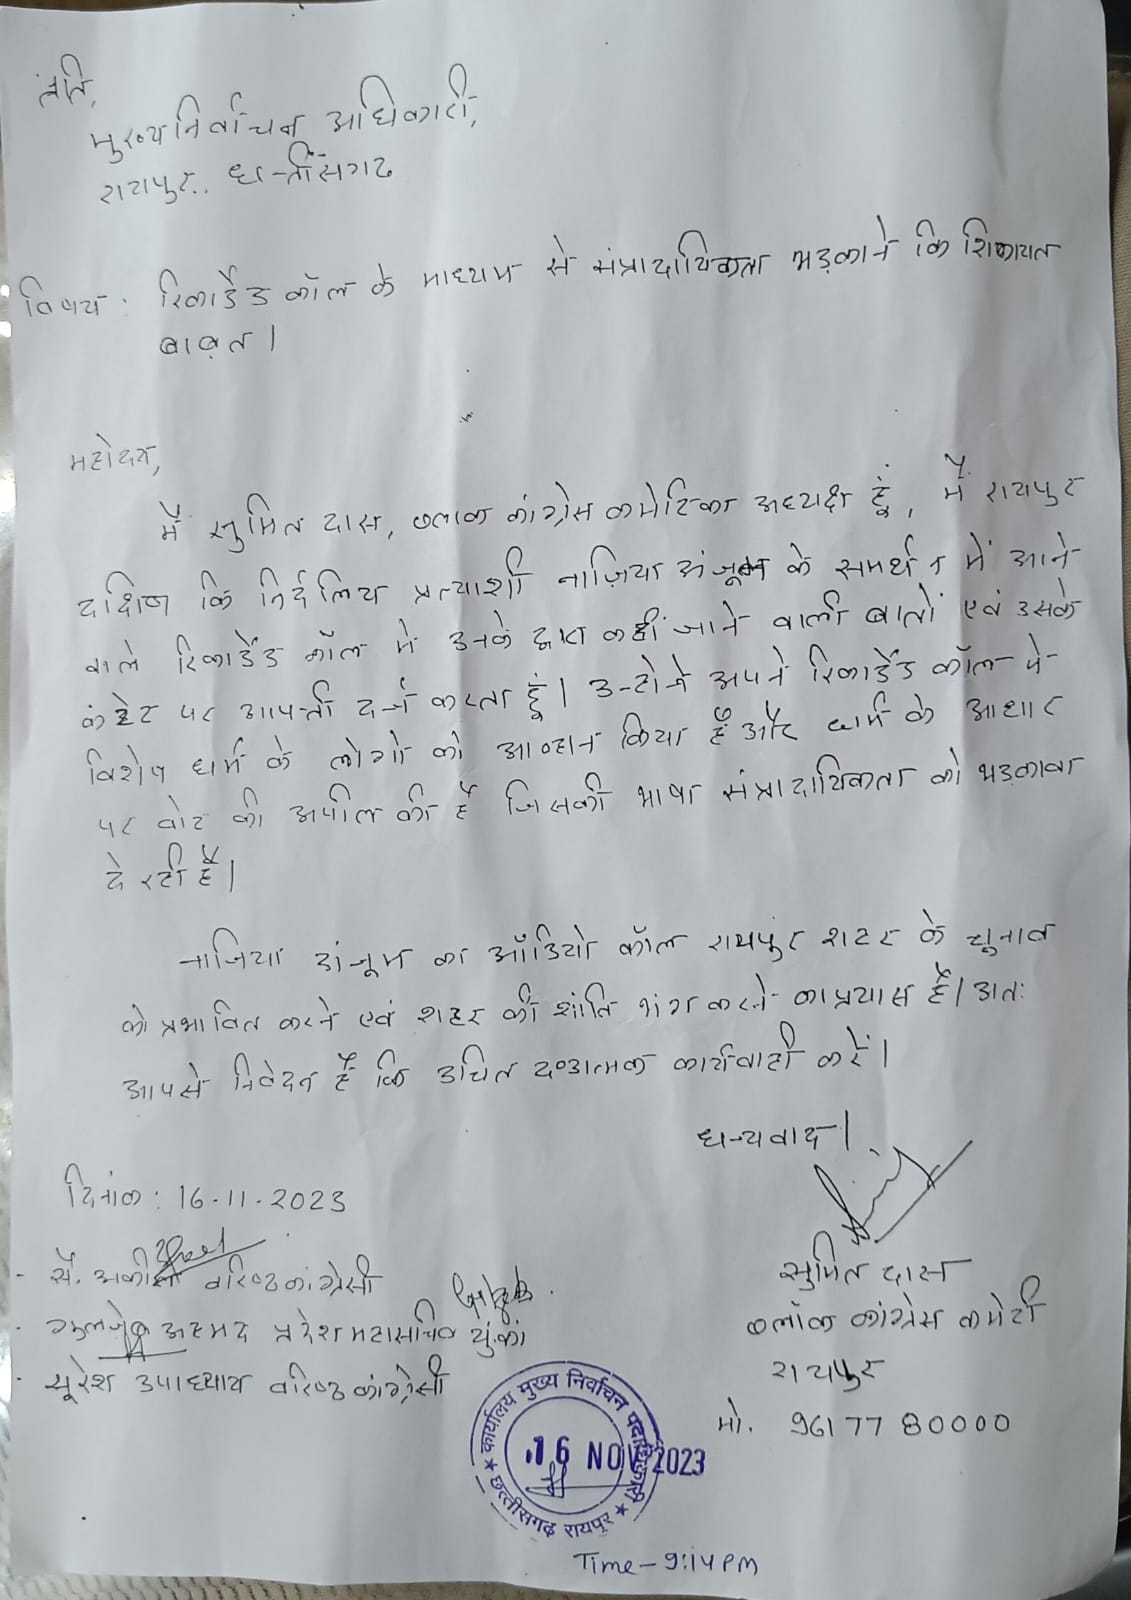 Complaint against appeal for votes on the basis of religion through recorded audio call, Block Congress President Sumit Das, Syed Akil and Gulzeb Ahmed complained against Raipur South's independent candidate Nazia Anjum to the Chief Electoral Officer, Assembly Elections, Chhattisgarh, Khabargali